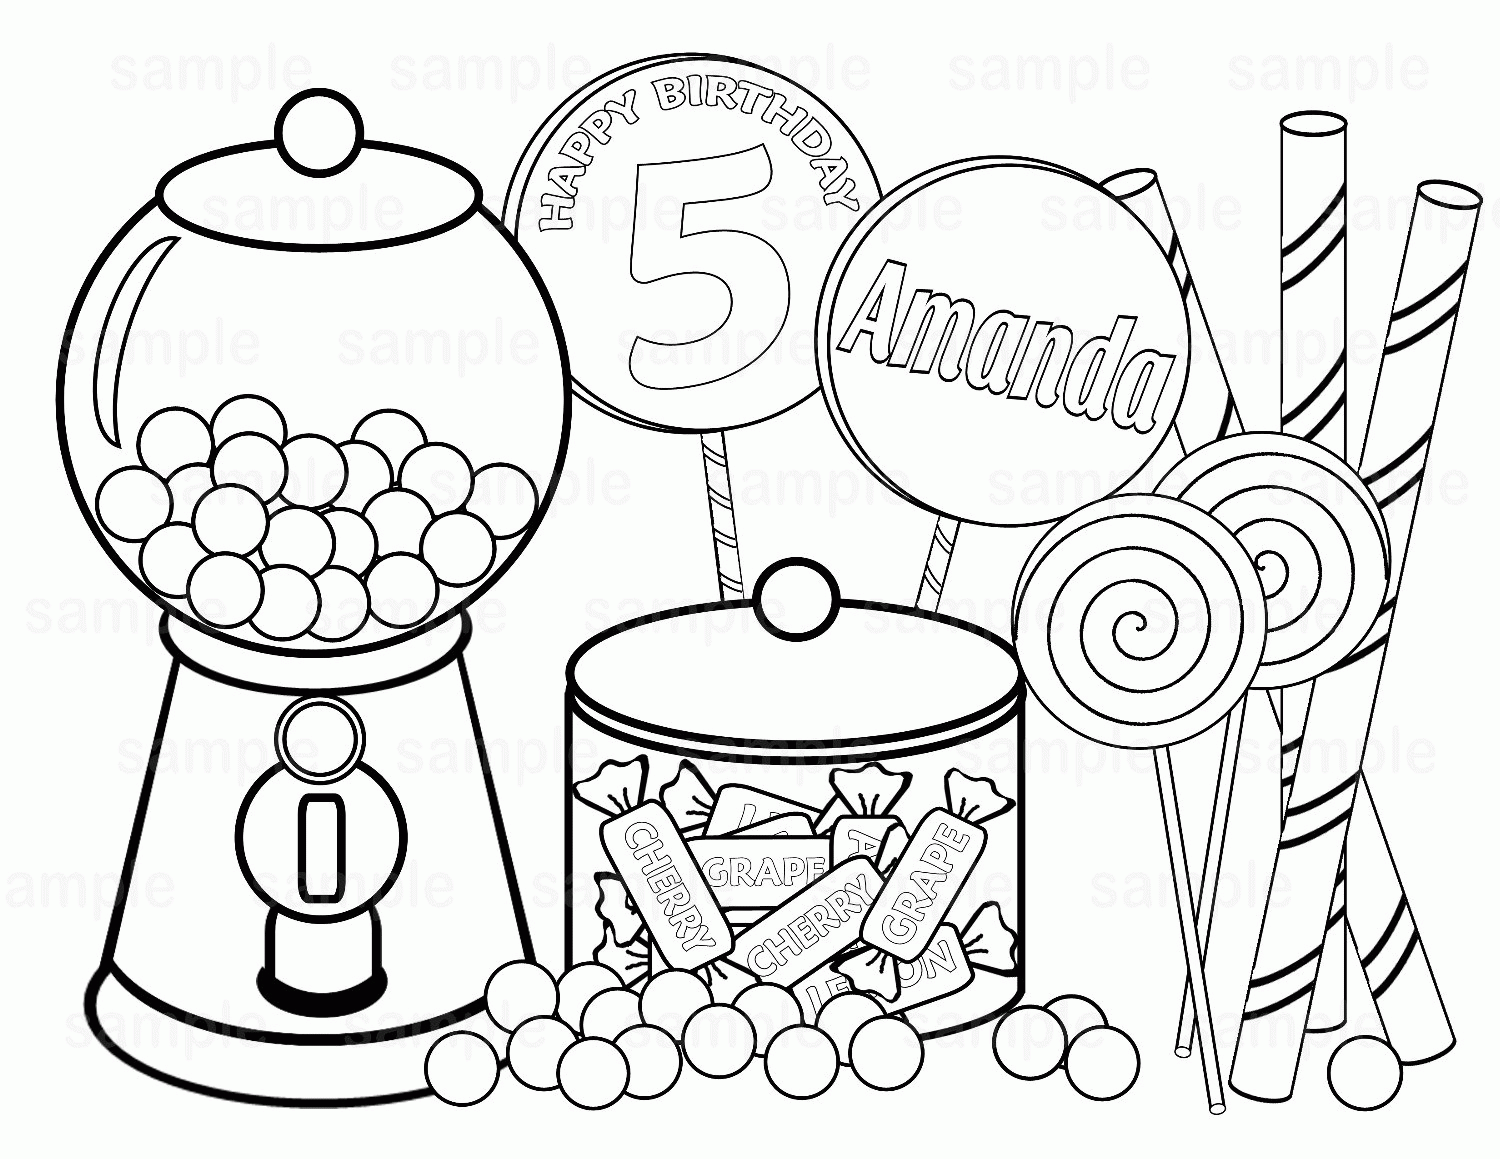 Candy Crush Coloring Pages | Coloring Pages For All Ages